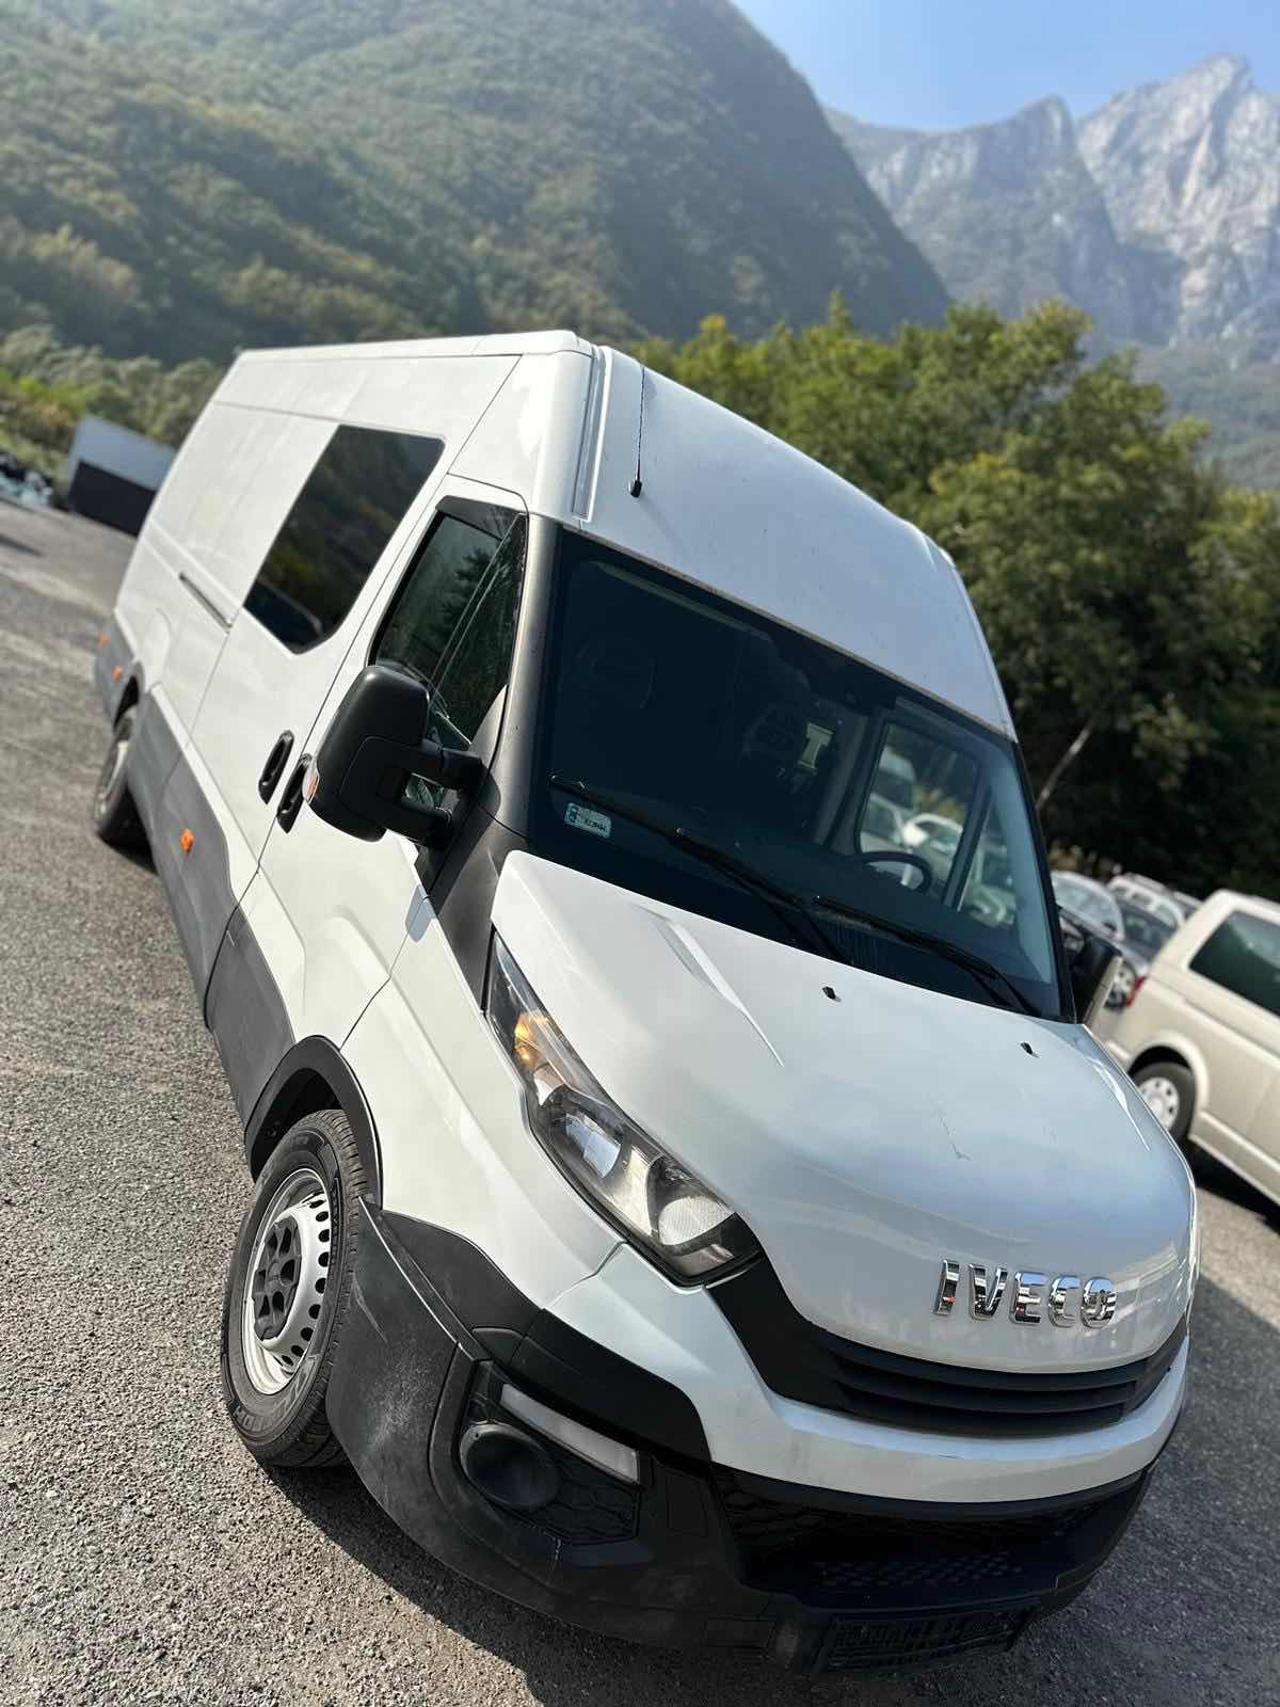 Iveco Daily Other in White used in Niardo - Bs for € 31,000.-